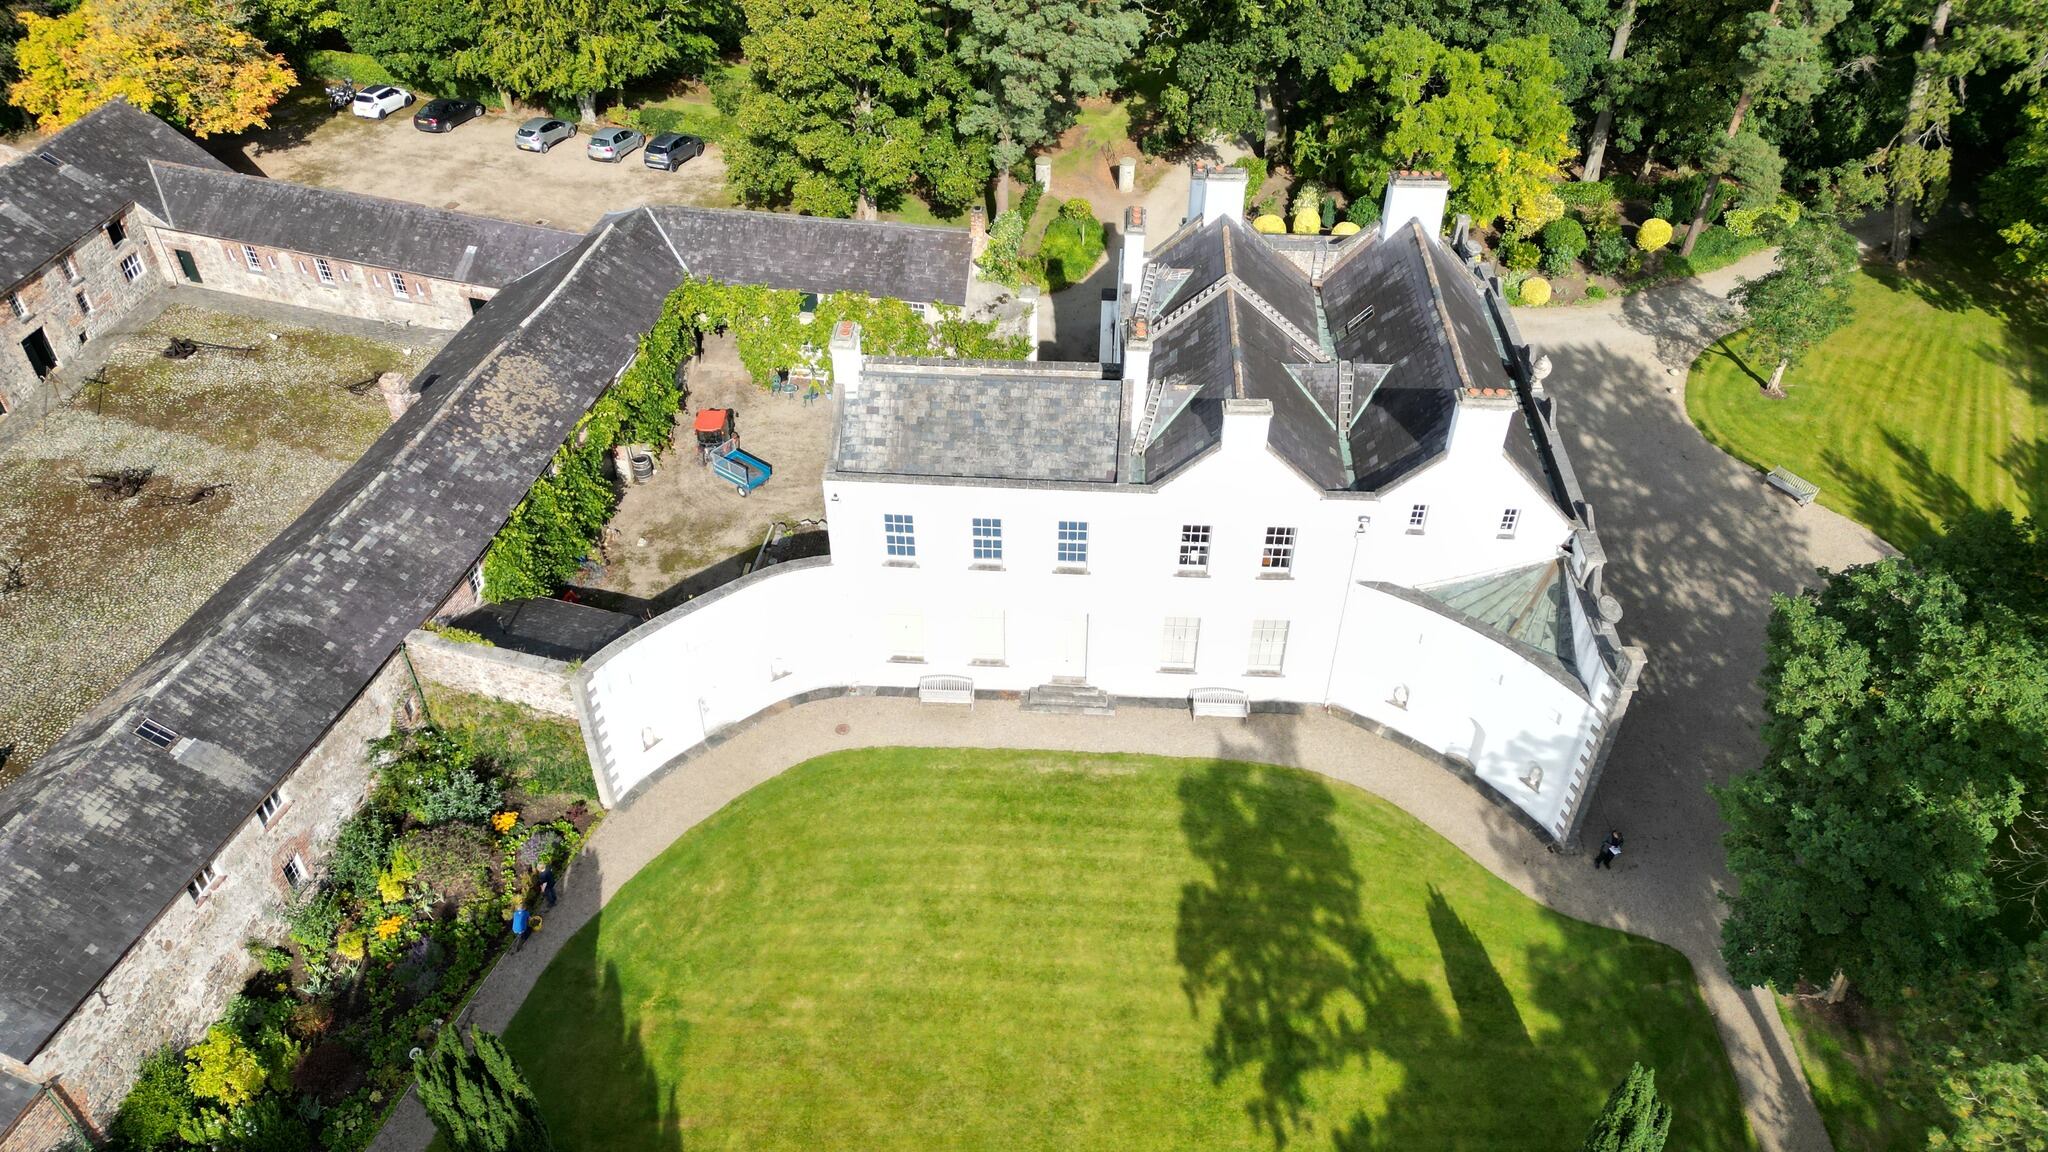 Ardress House is a 17th-century farmhouse set in 100 acres of countryside in Co Armagh